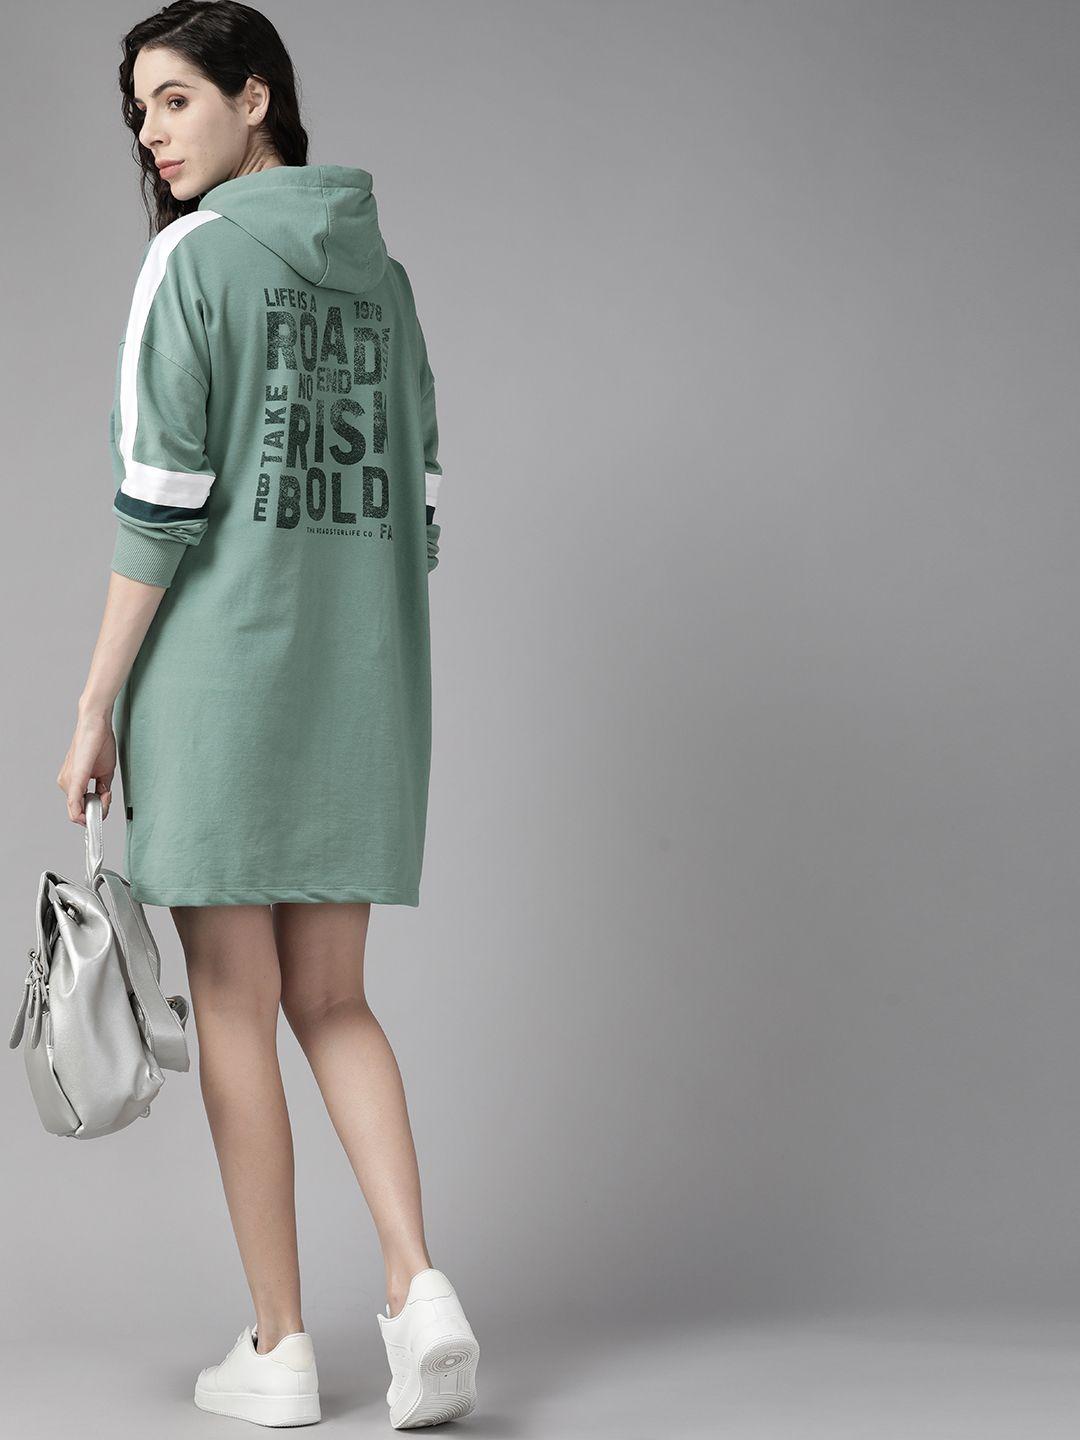 the roadster lifestyle co. women green printed hooded jumper dress